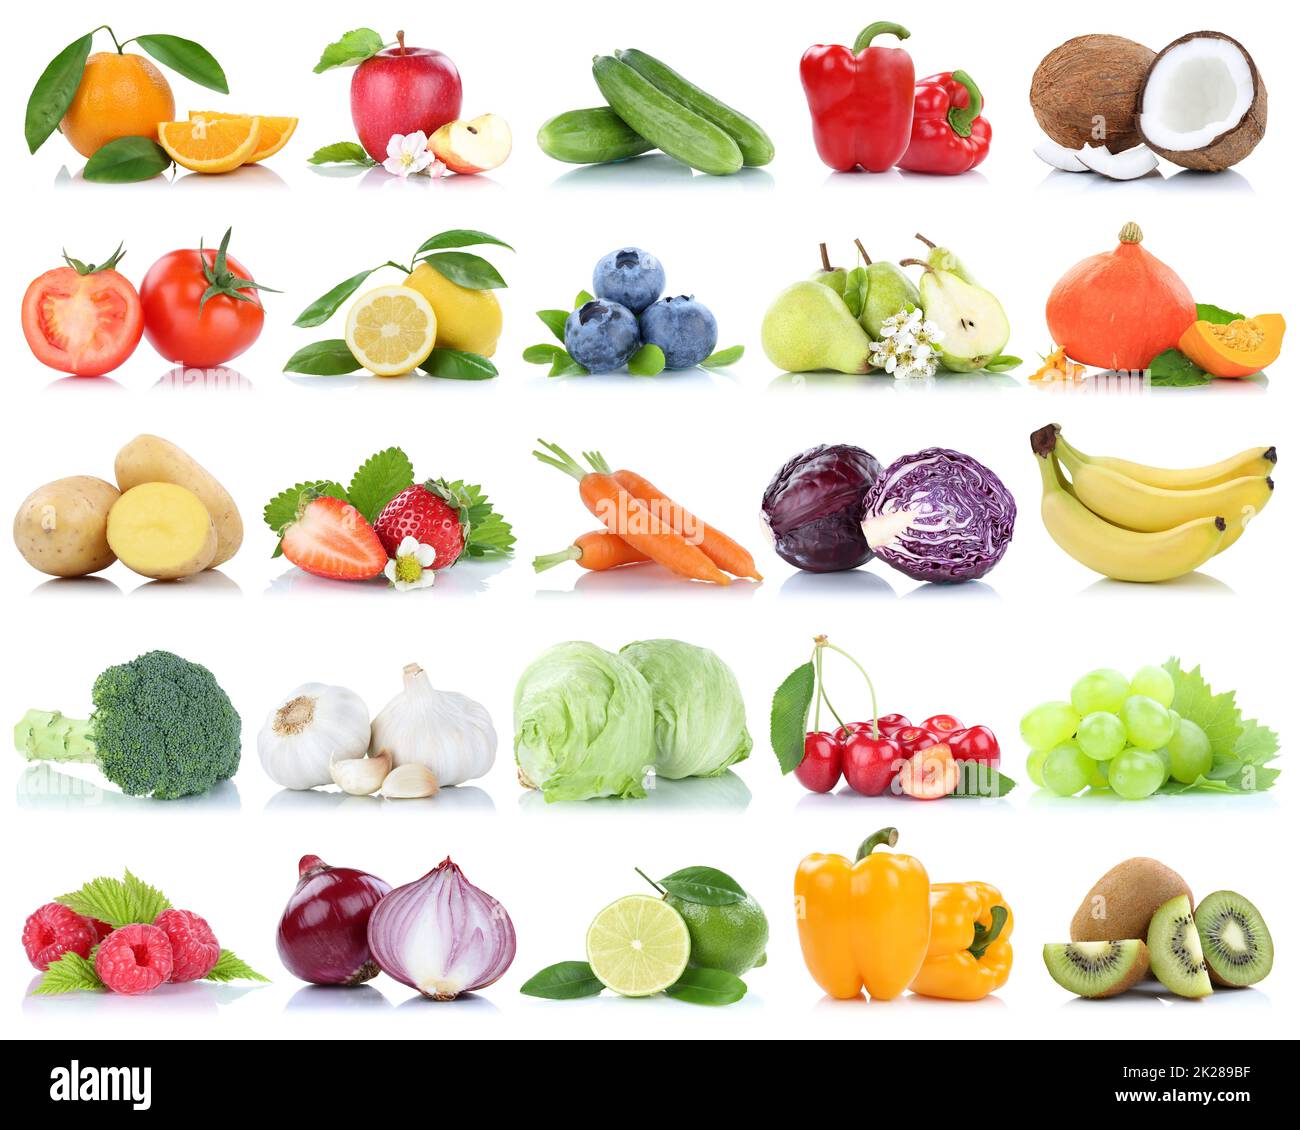 Fruits and vegetables collection isolated apple oranges onions tomatoes lettuce berries fruit Stock Photo